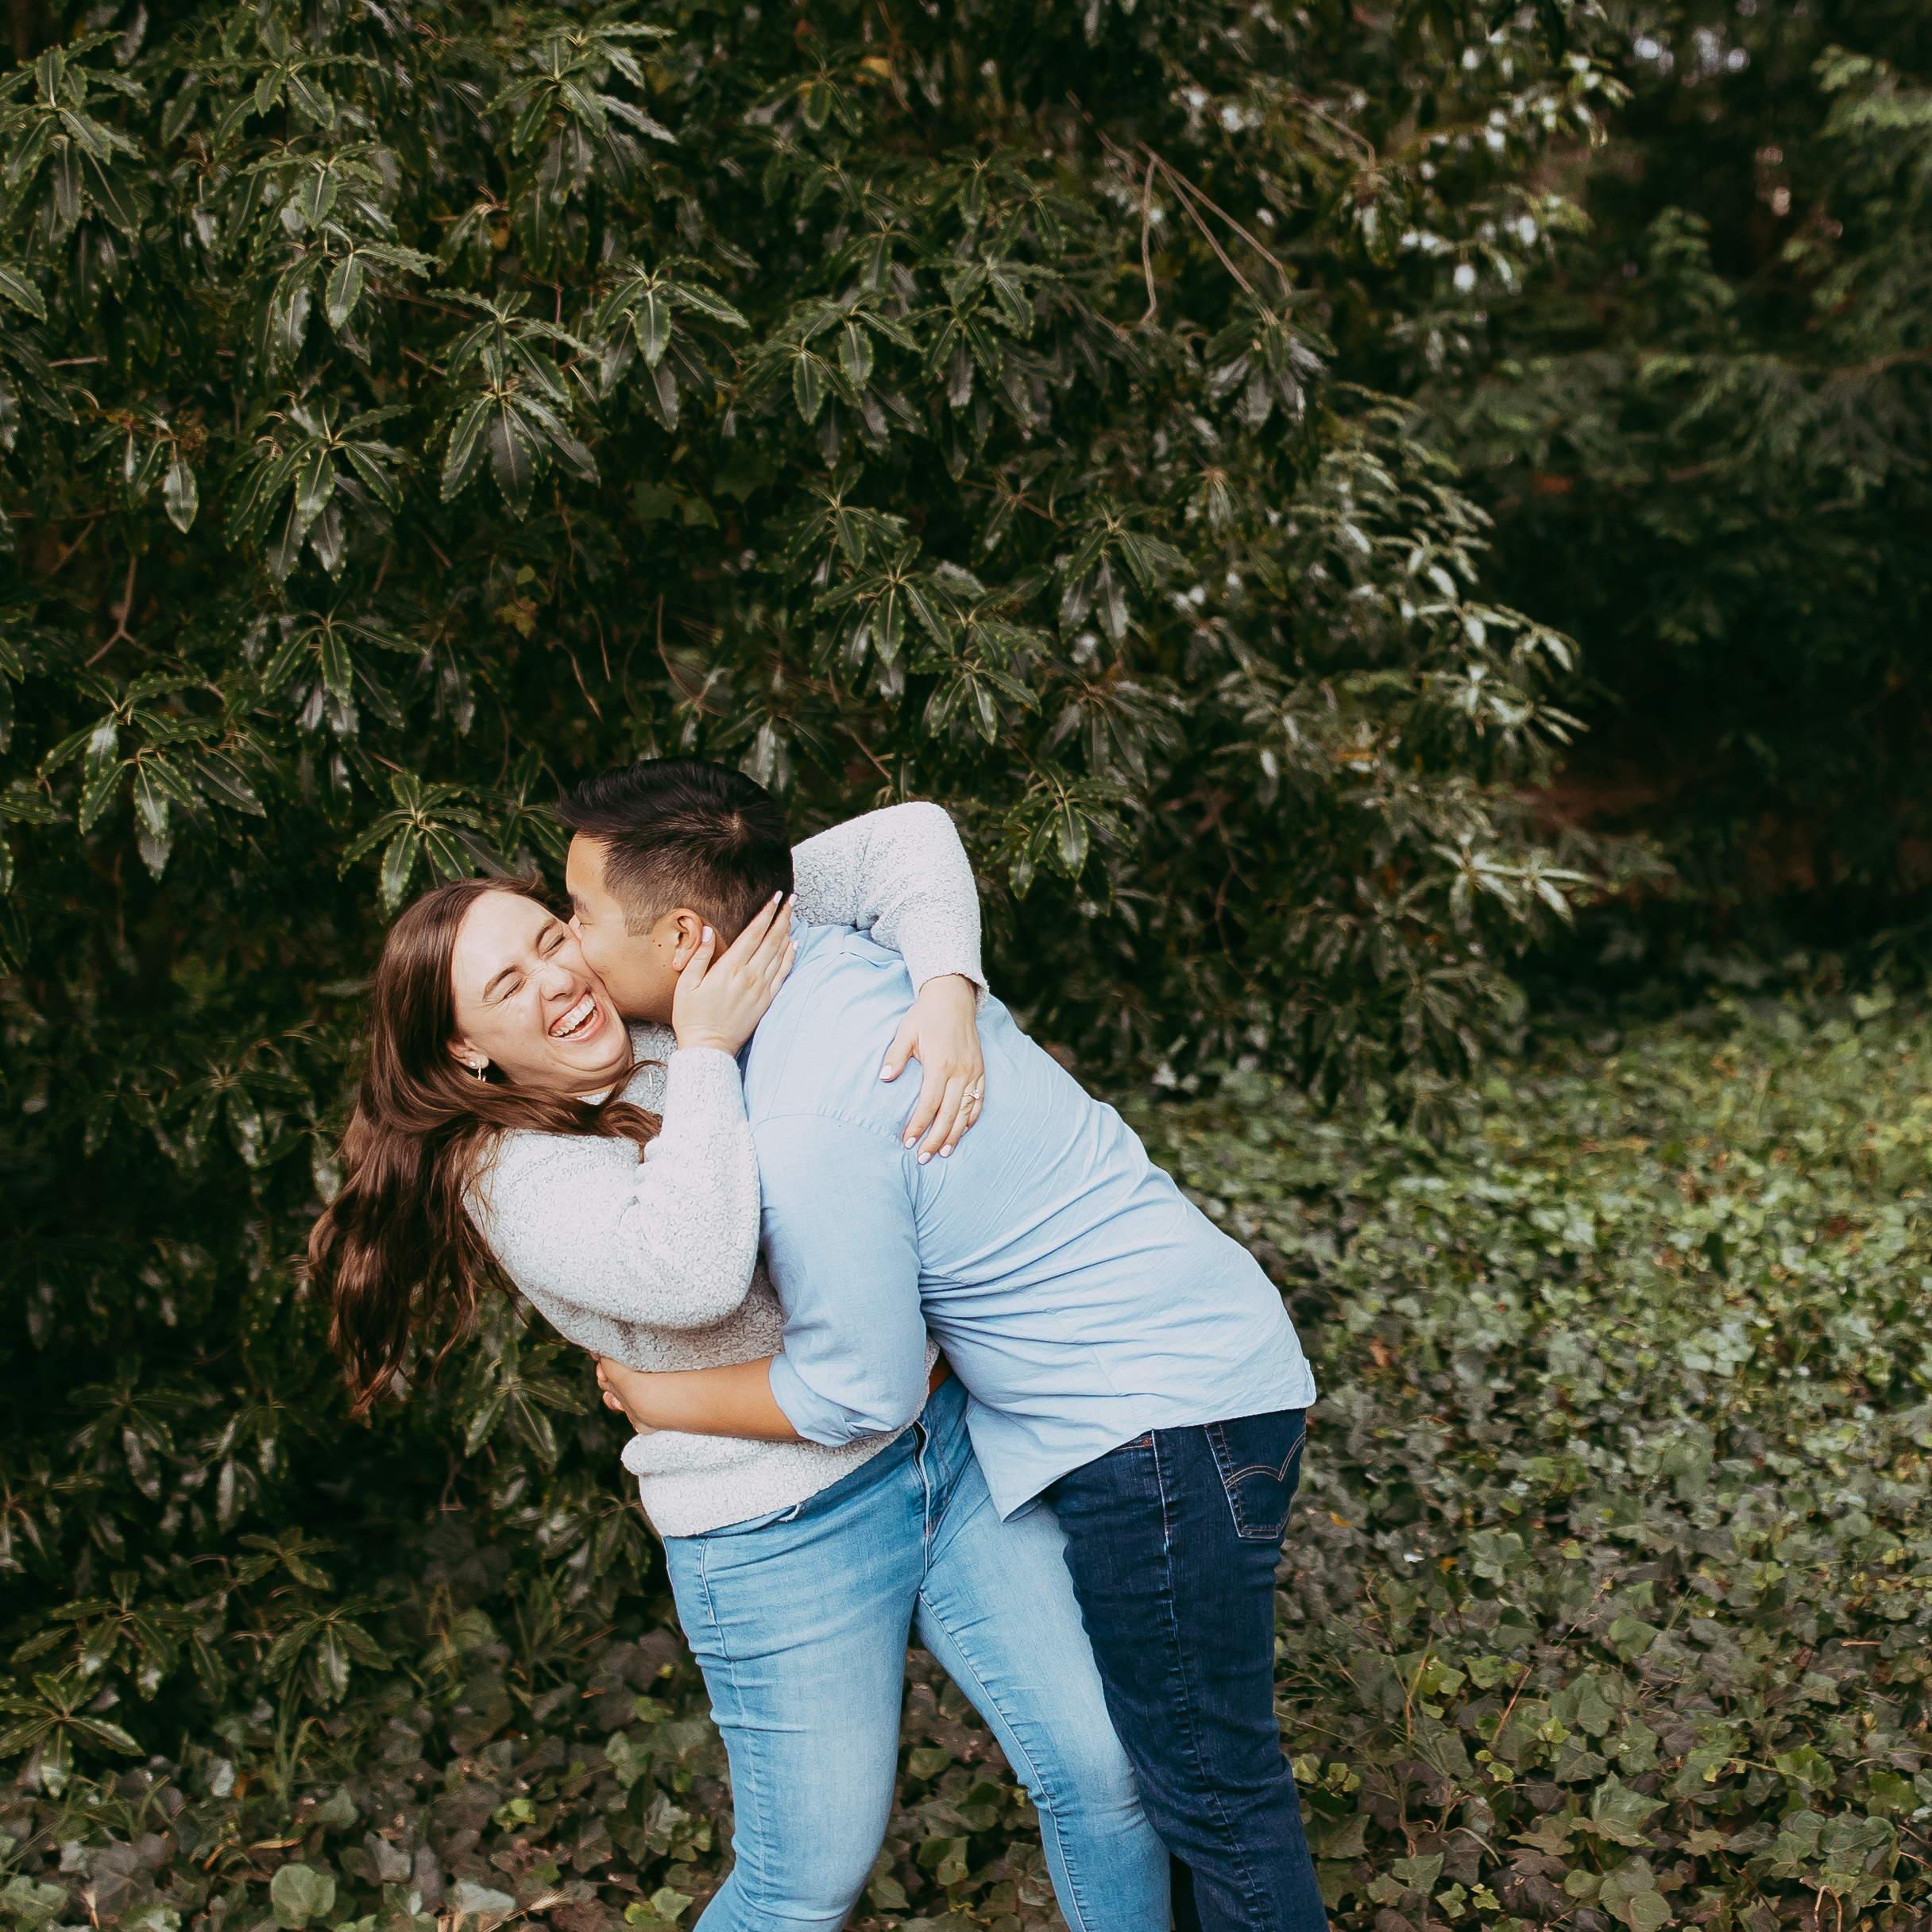 Engagement photos from June 2022